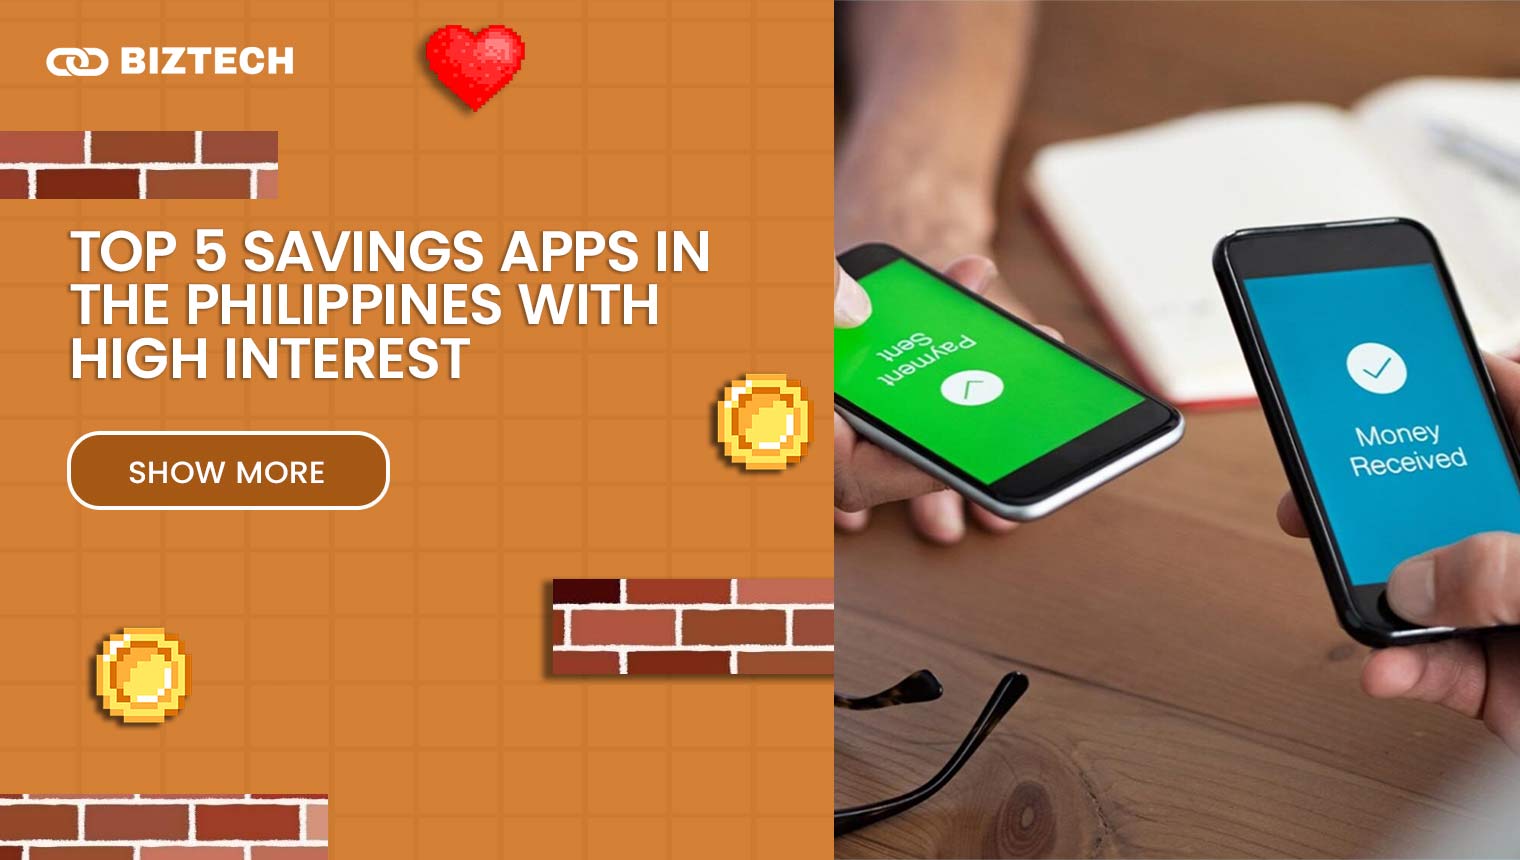 Top 5 Savings Apps in the Philippines with High Interest